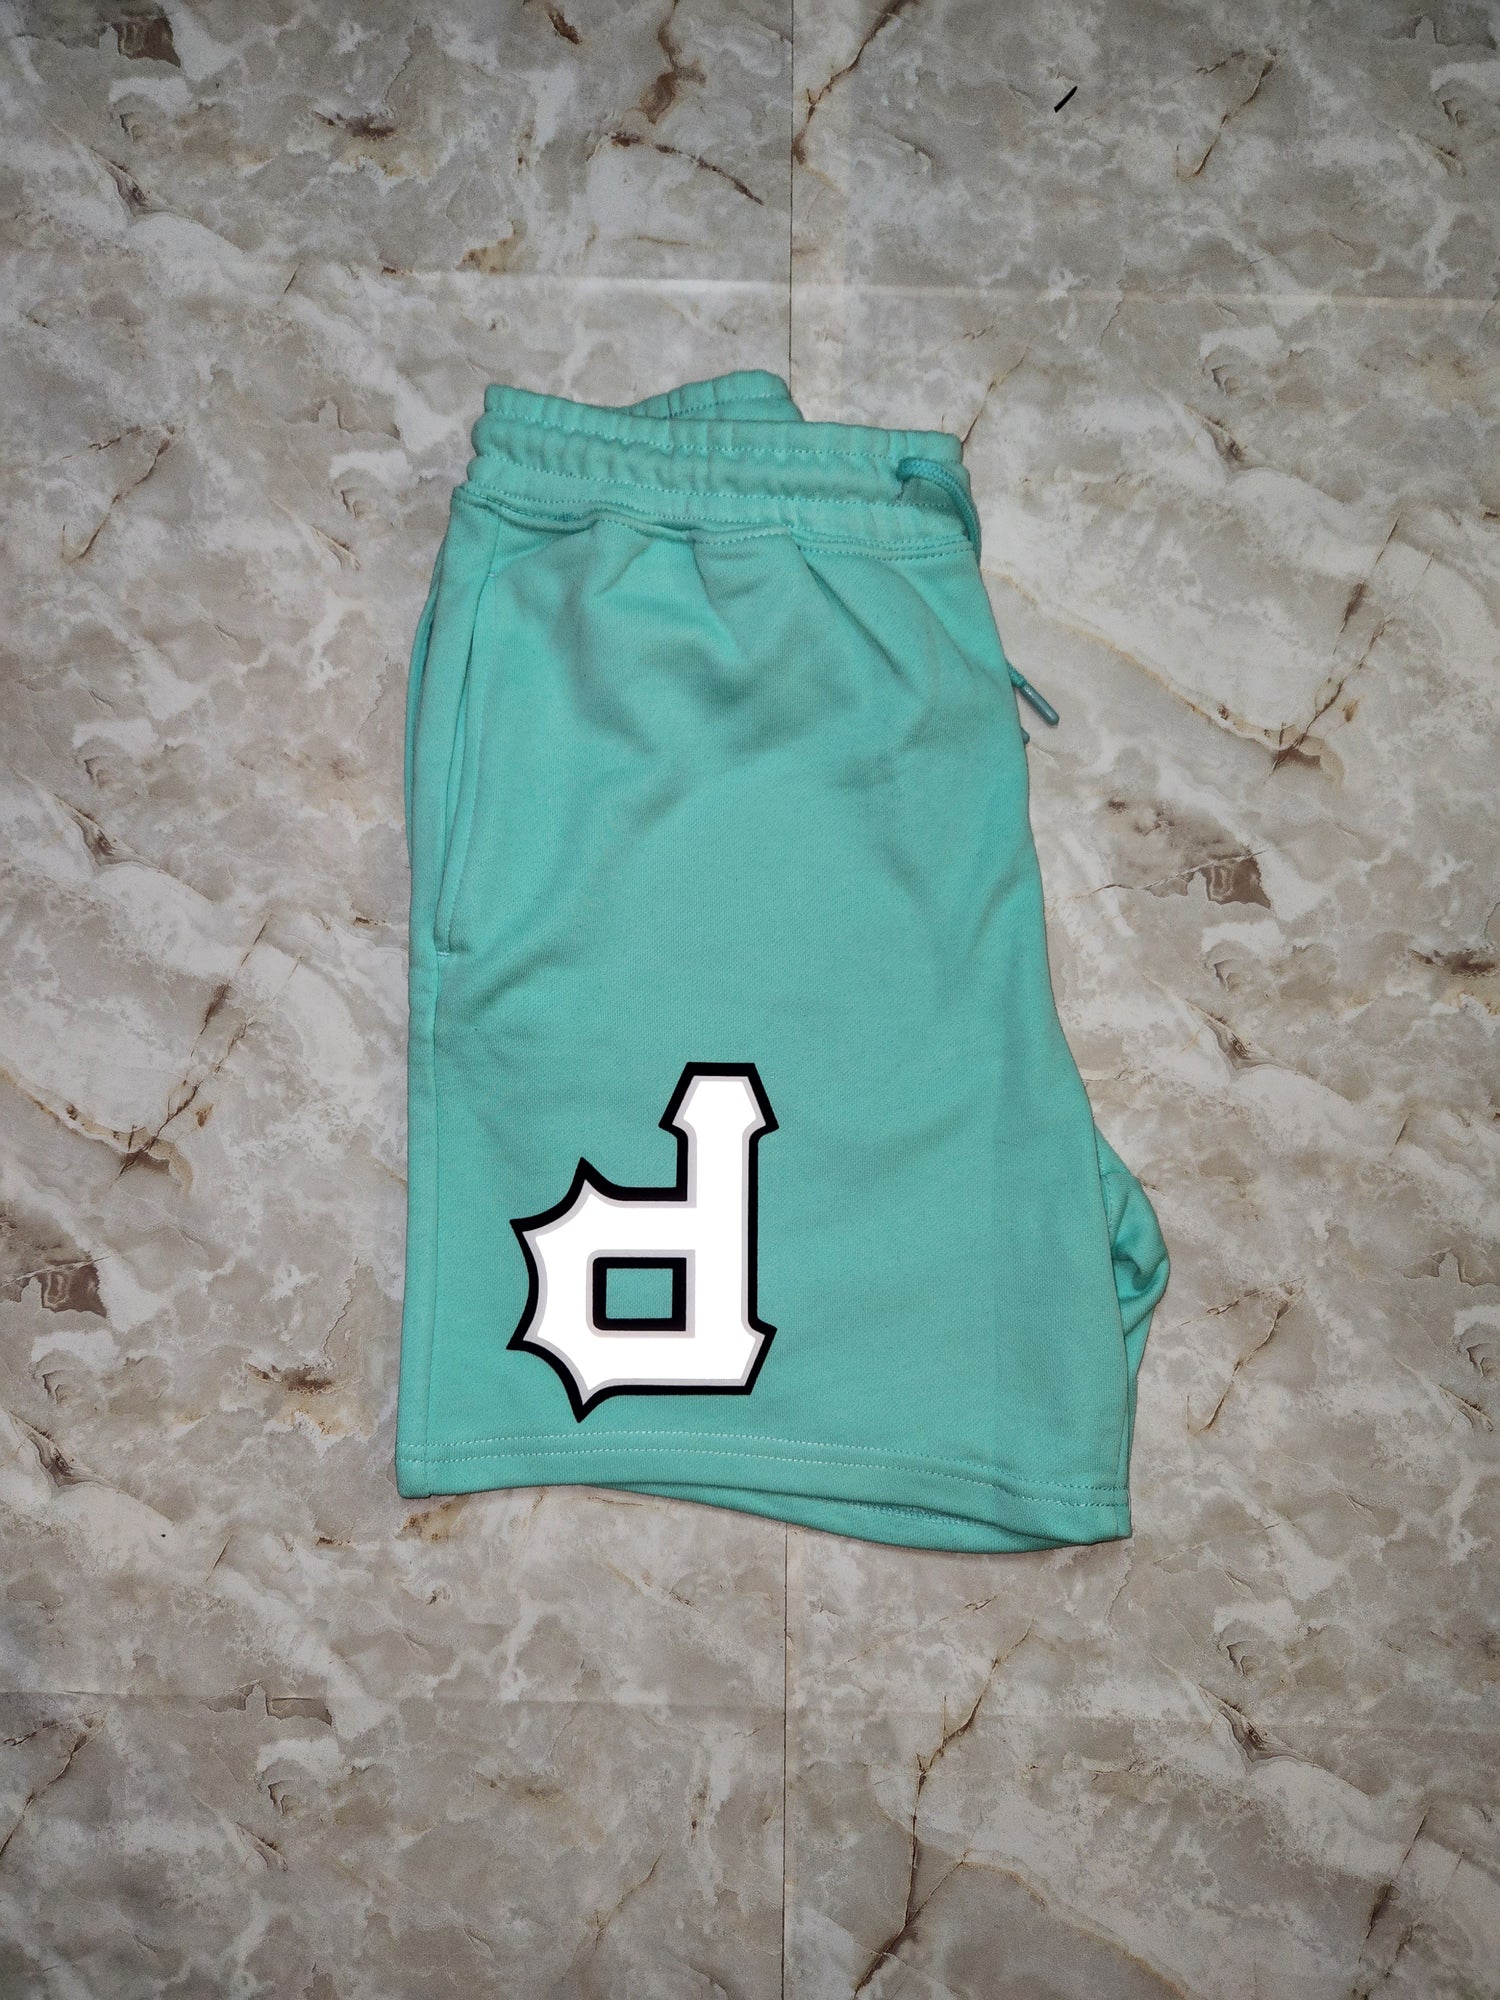 Mint P Shorts - Centre Ave Clothing Co.